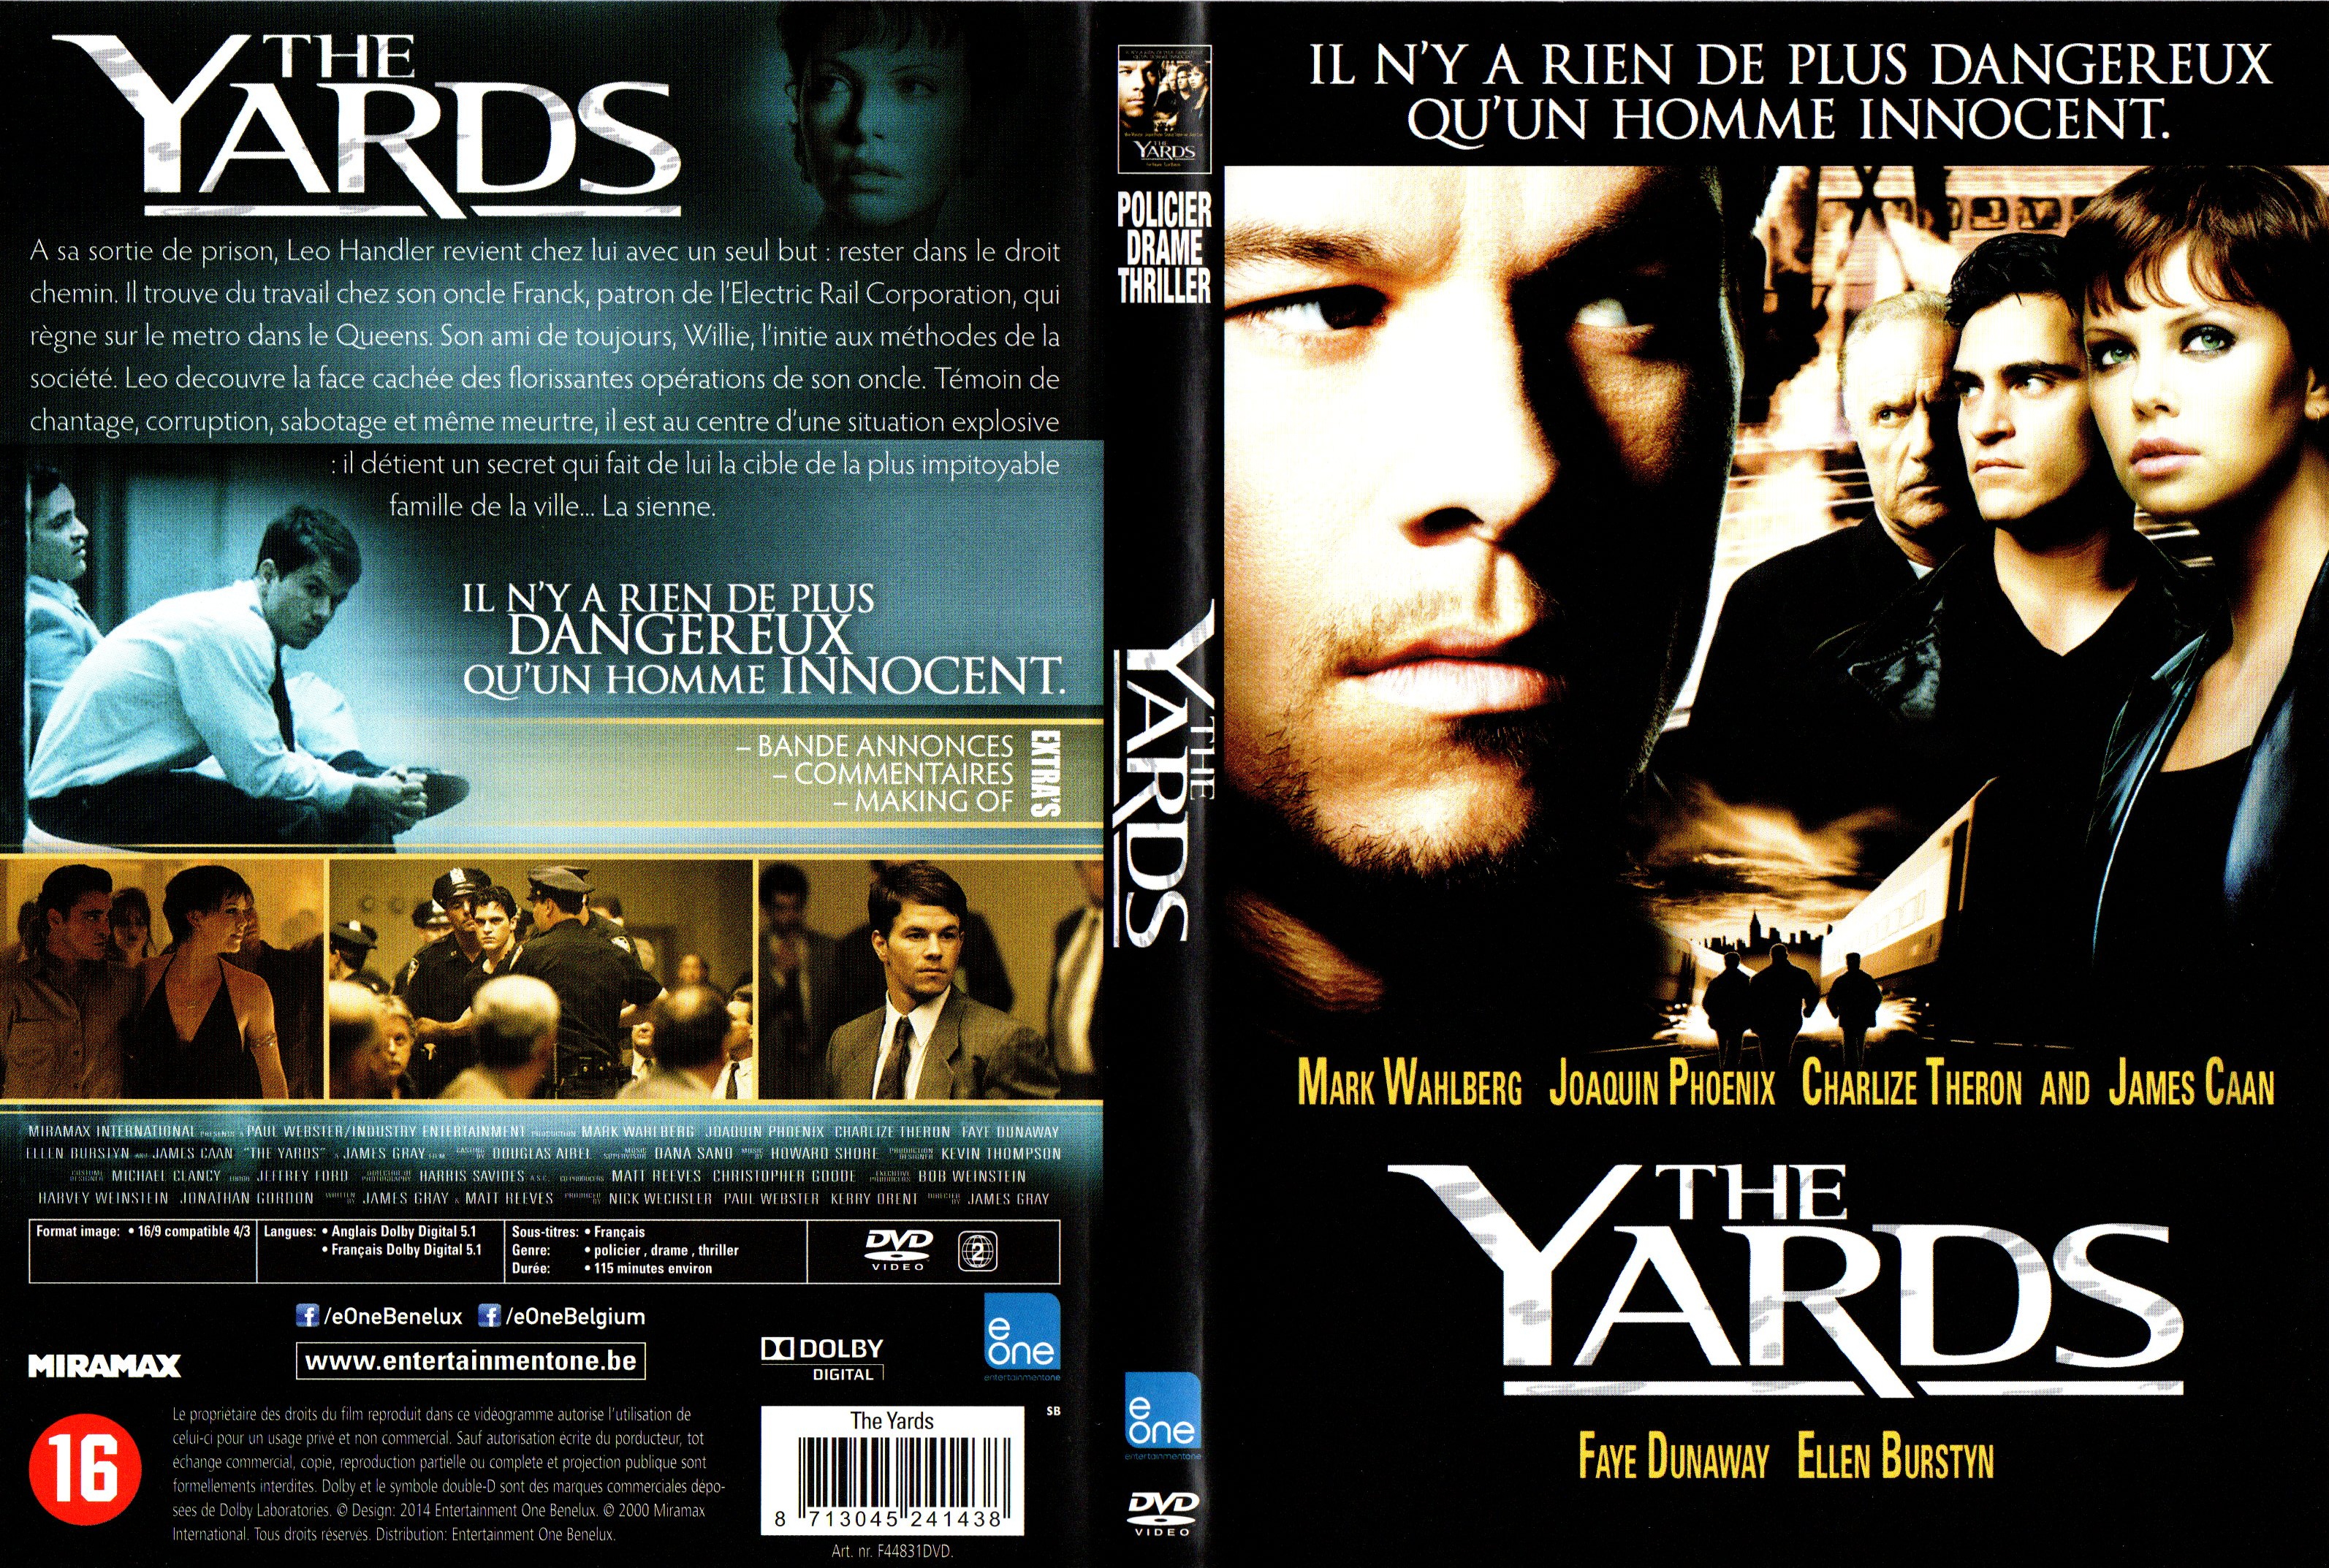 Jaquette DVD The yards v3